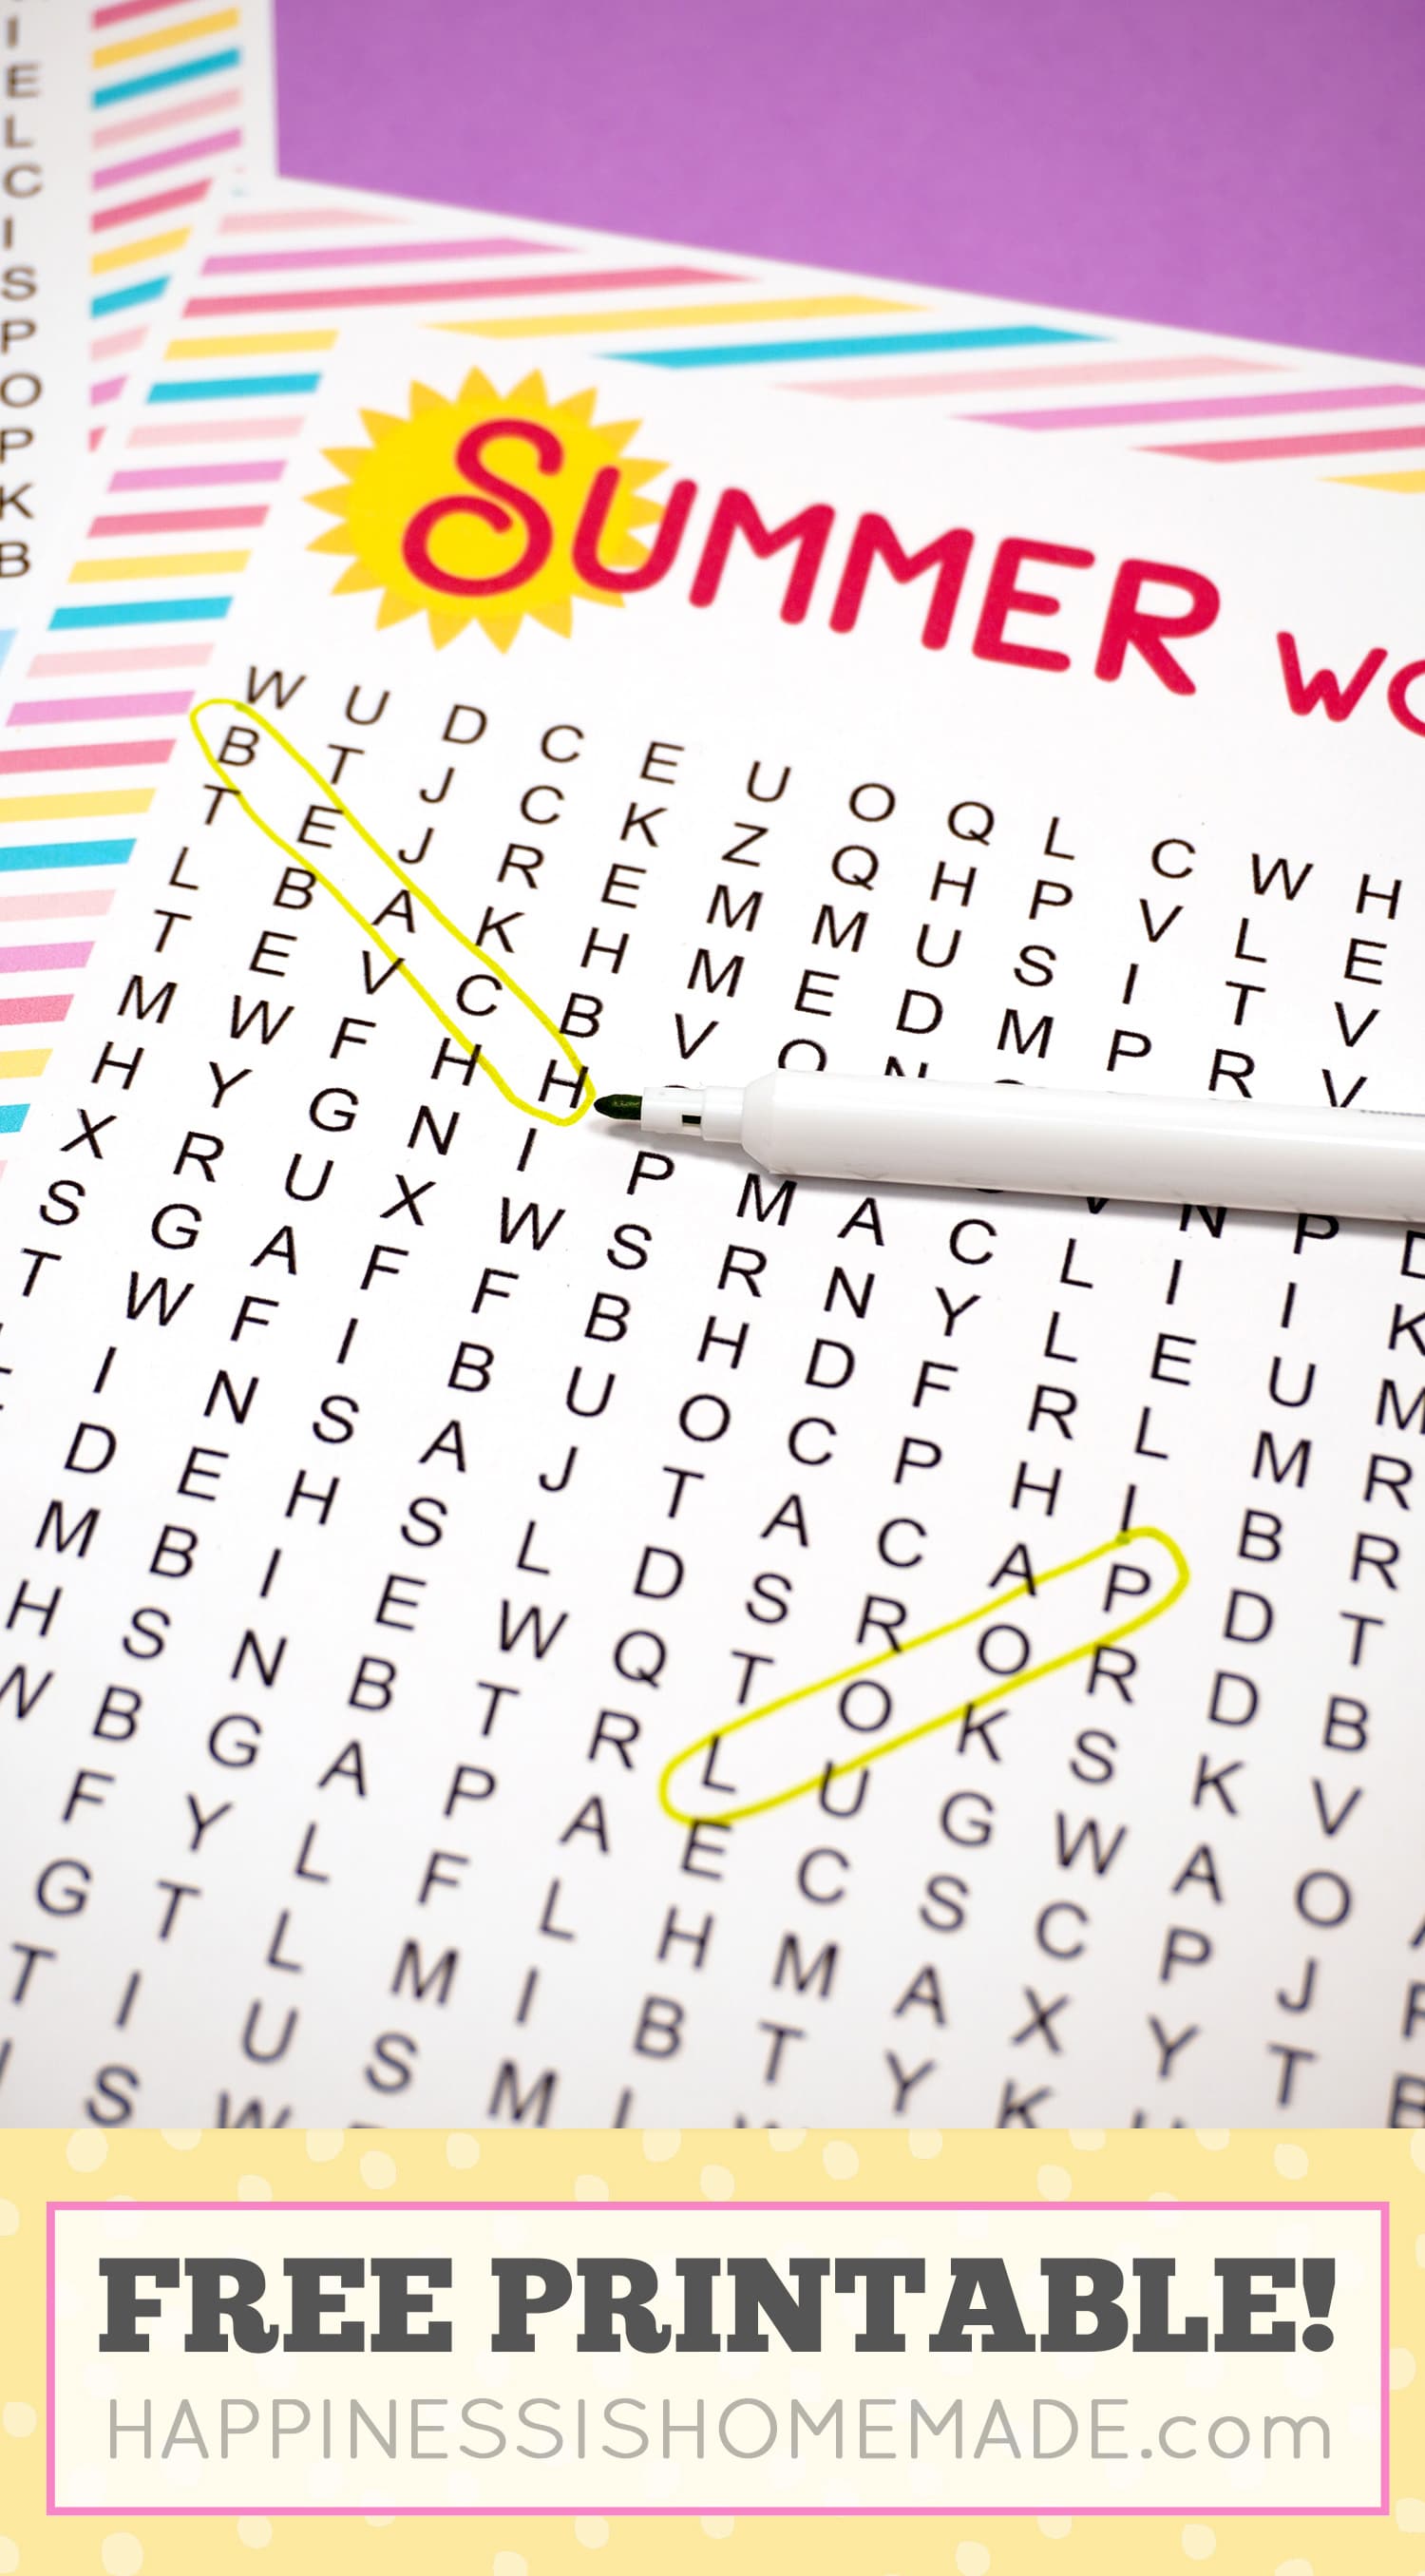 Summer word search with the words \"beach\" and \"loop\" circled in yellow.